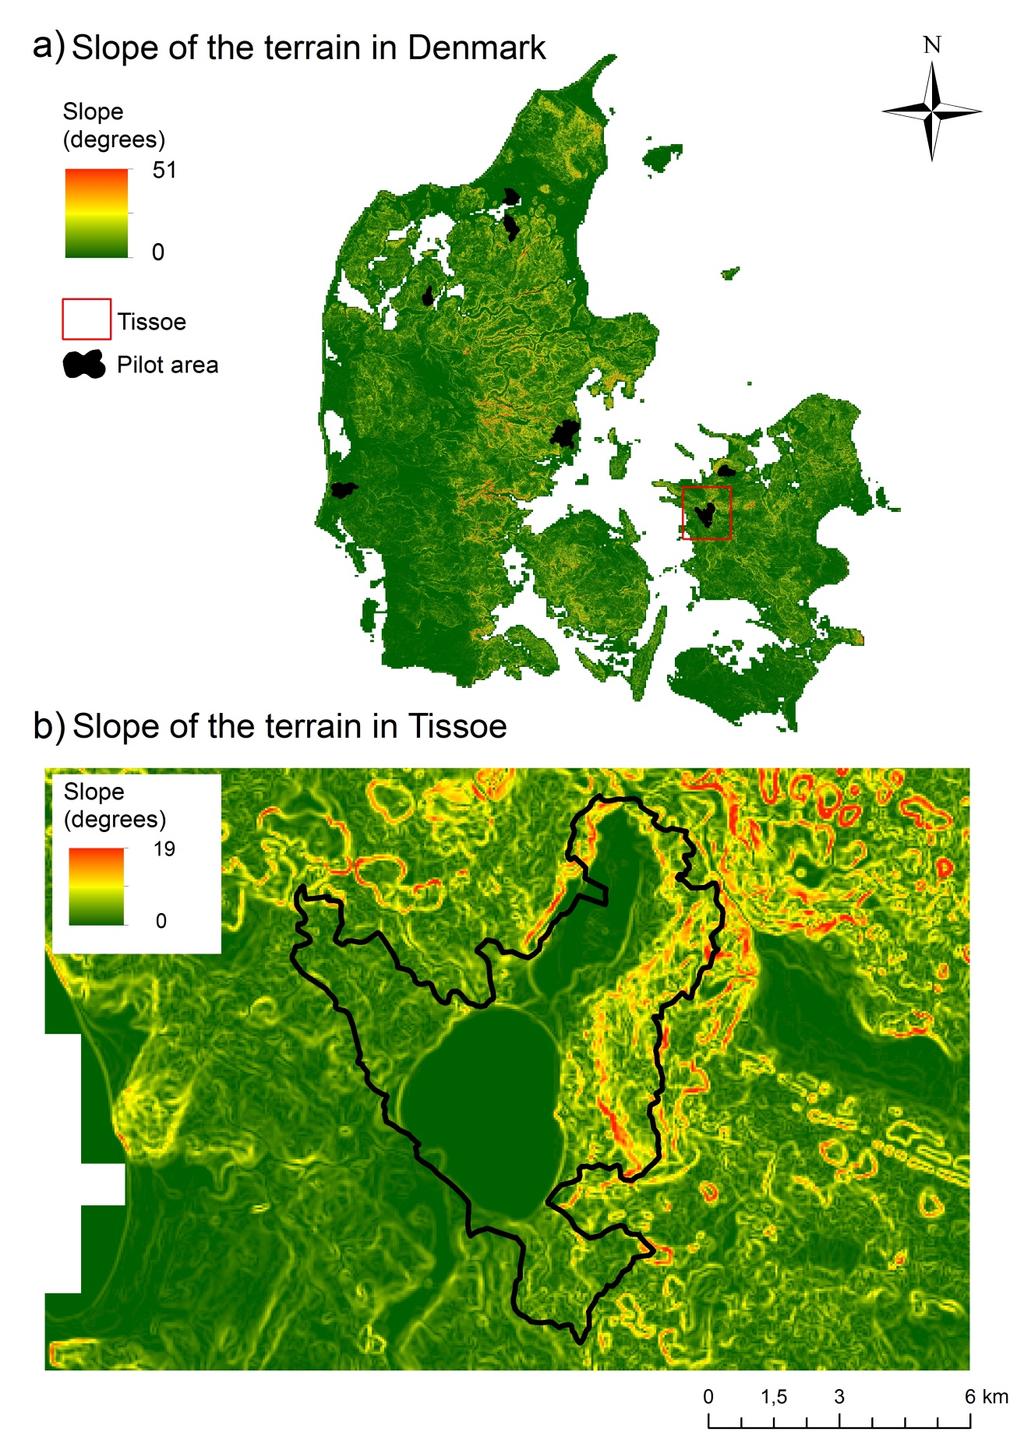 Map 2: Slope of the terrain in Denmark (a) and in